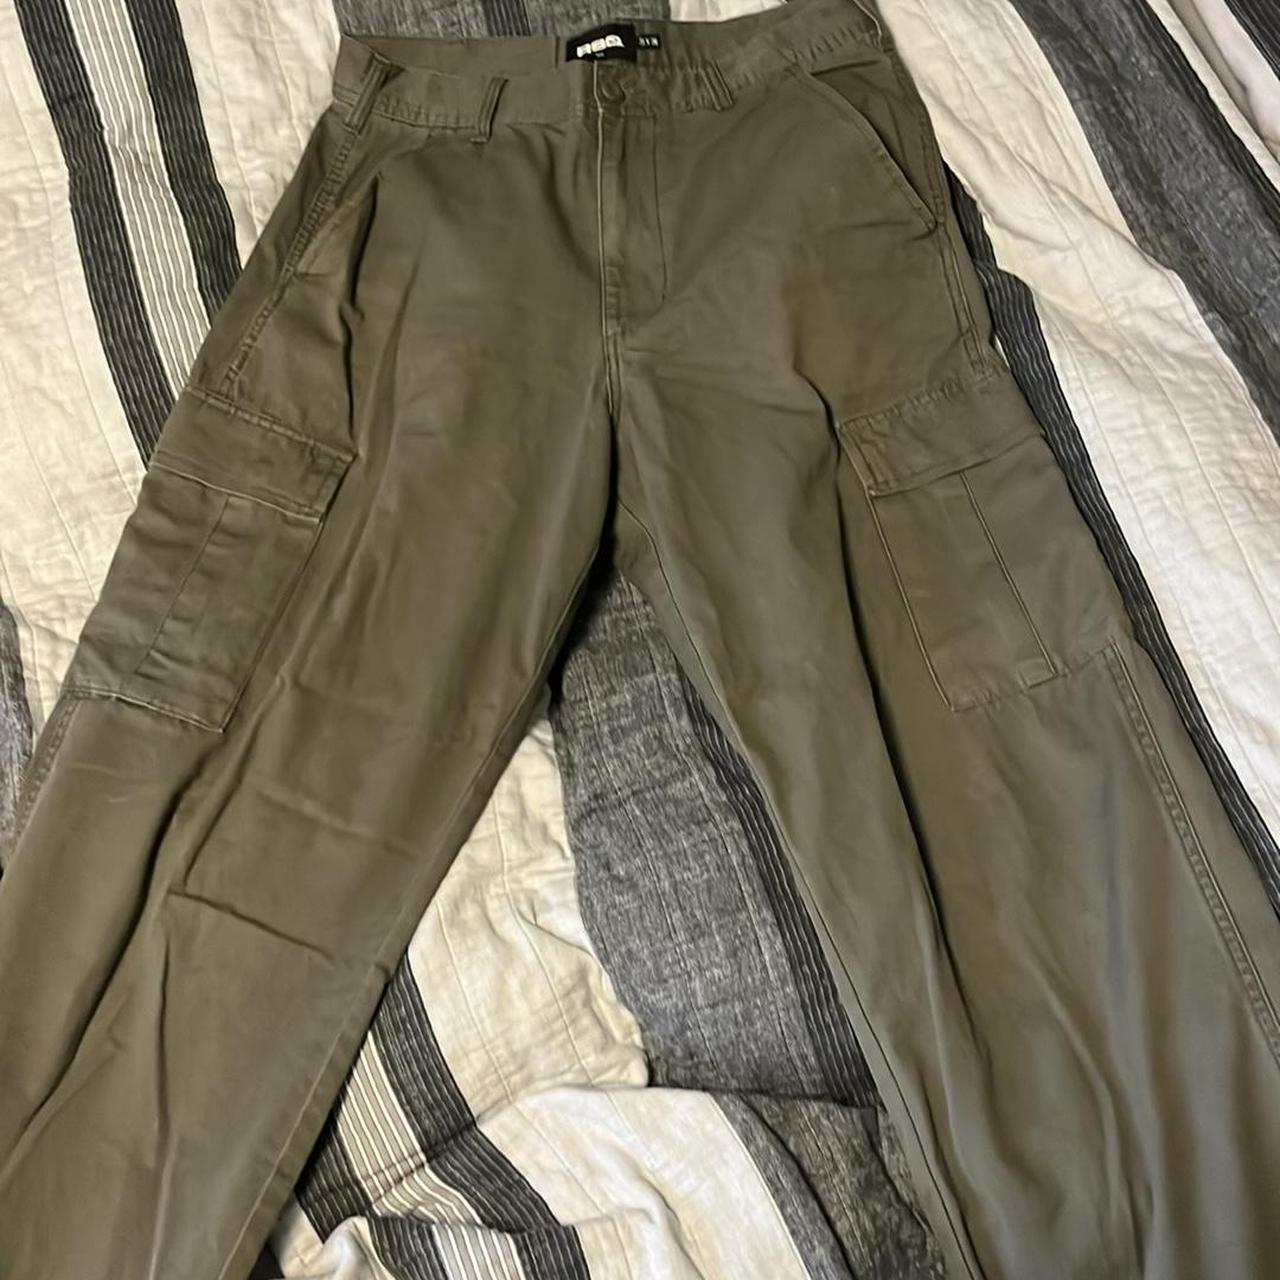 loose fit green rsq cargo pants size 31x30 - Depop